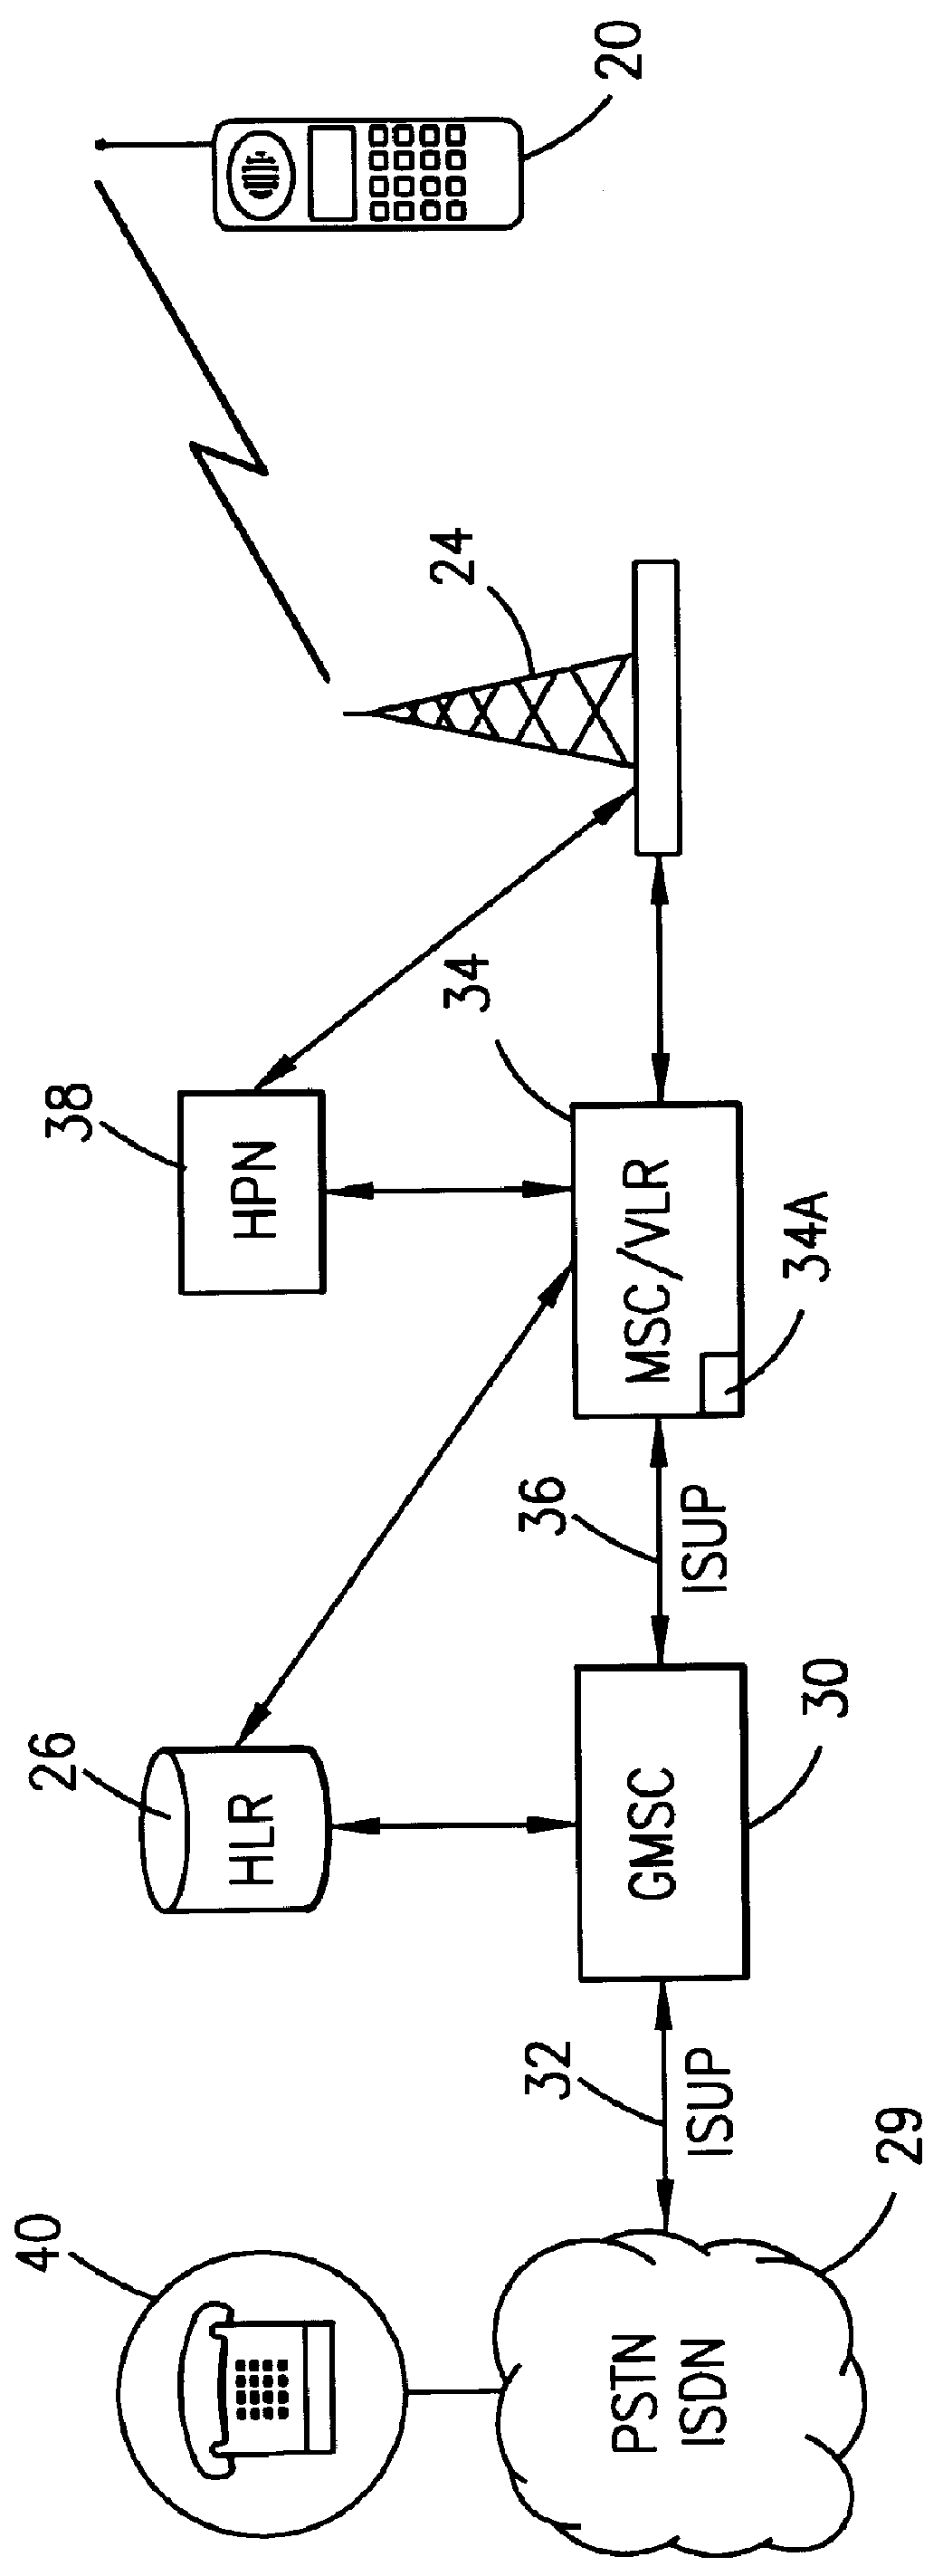 System and method for forwarding calling party information